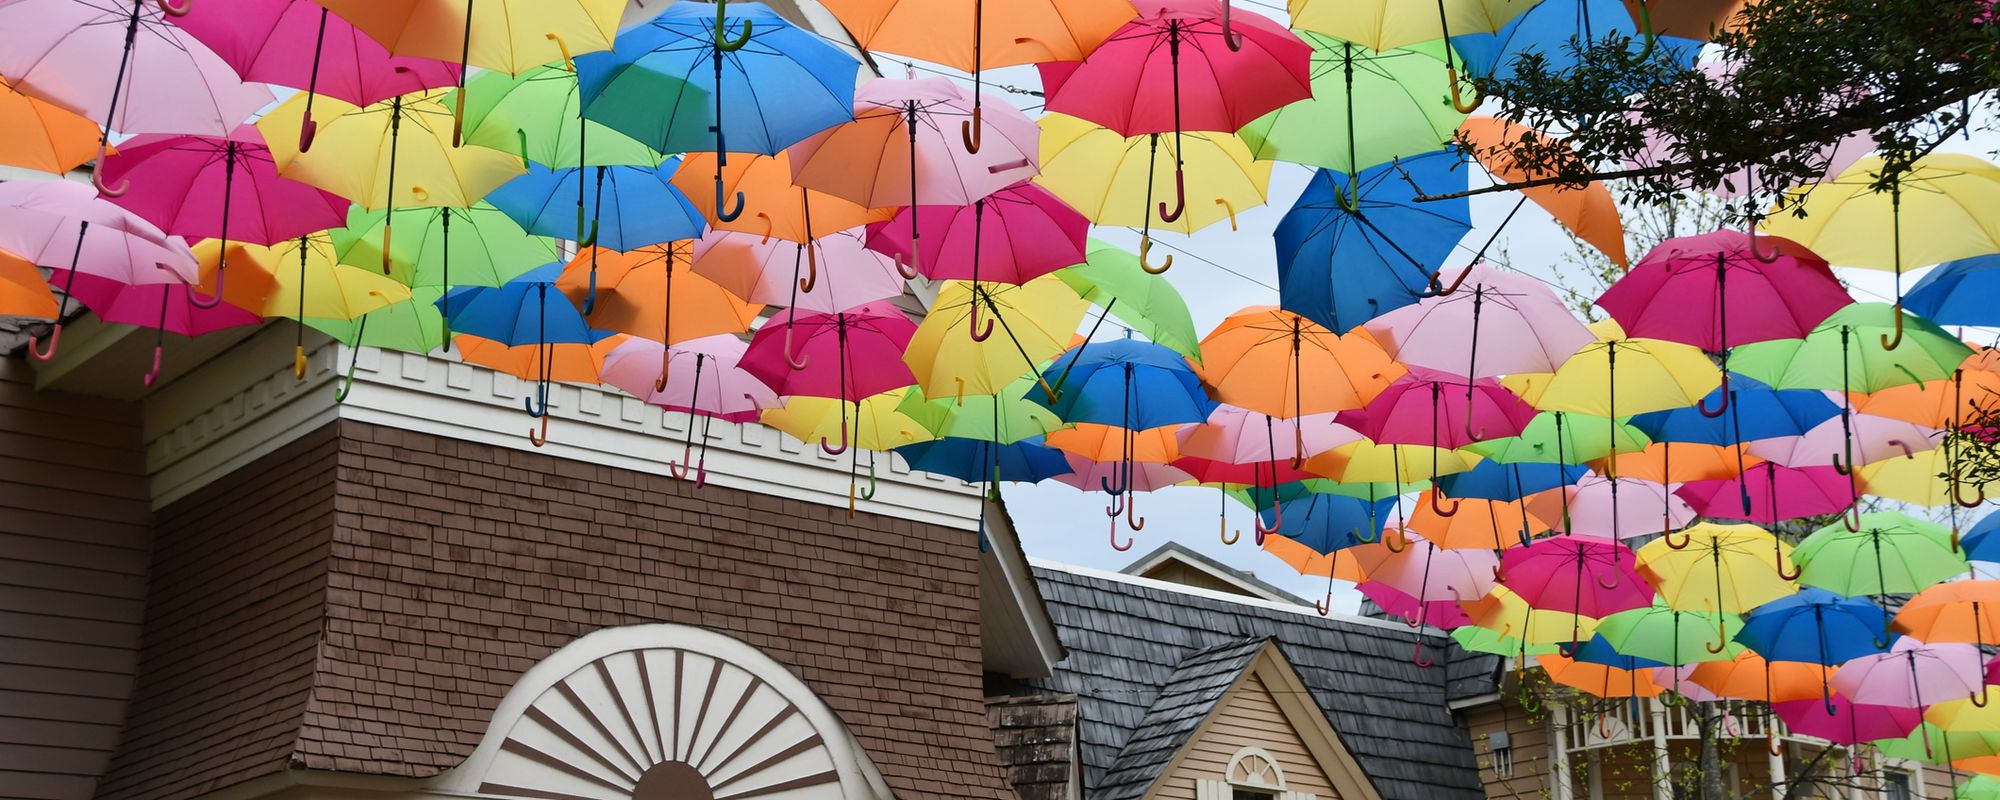 Colorful Umbrellas at Dollywood in Pigeon Forge